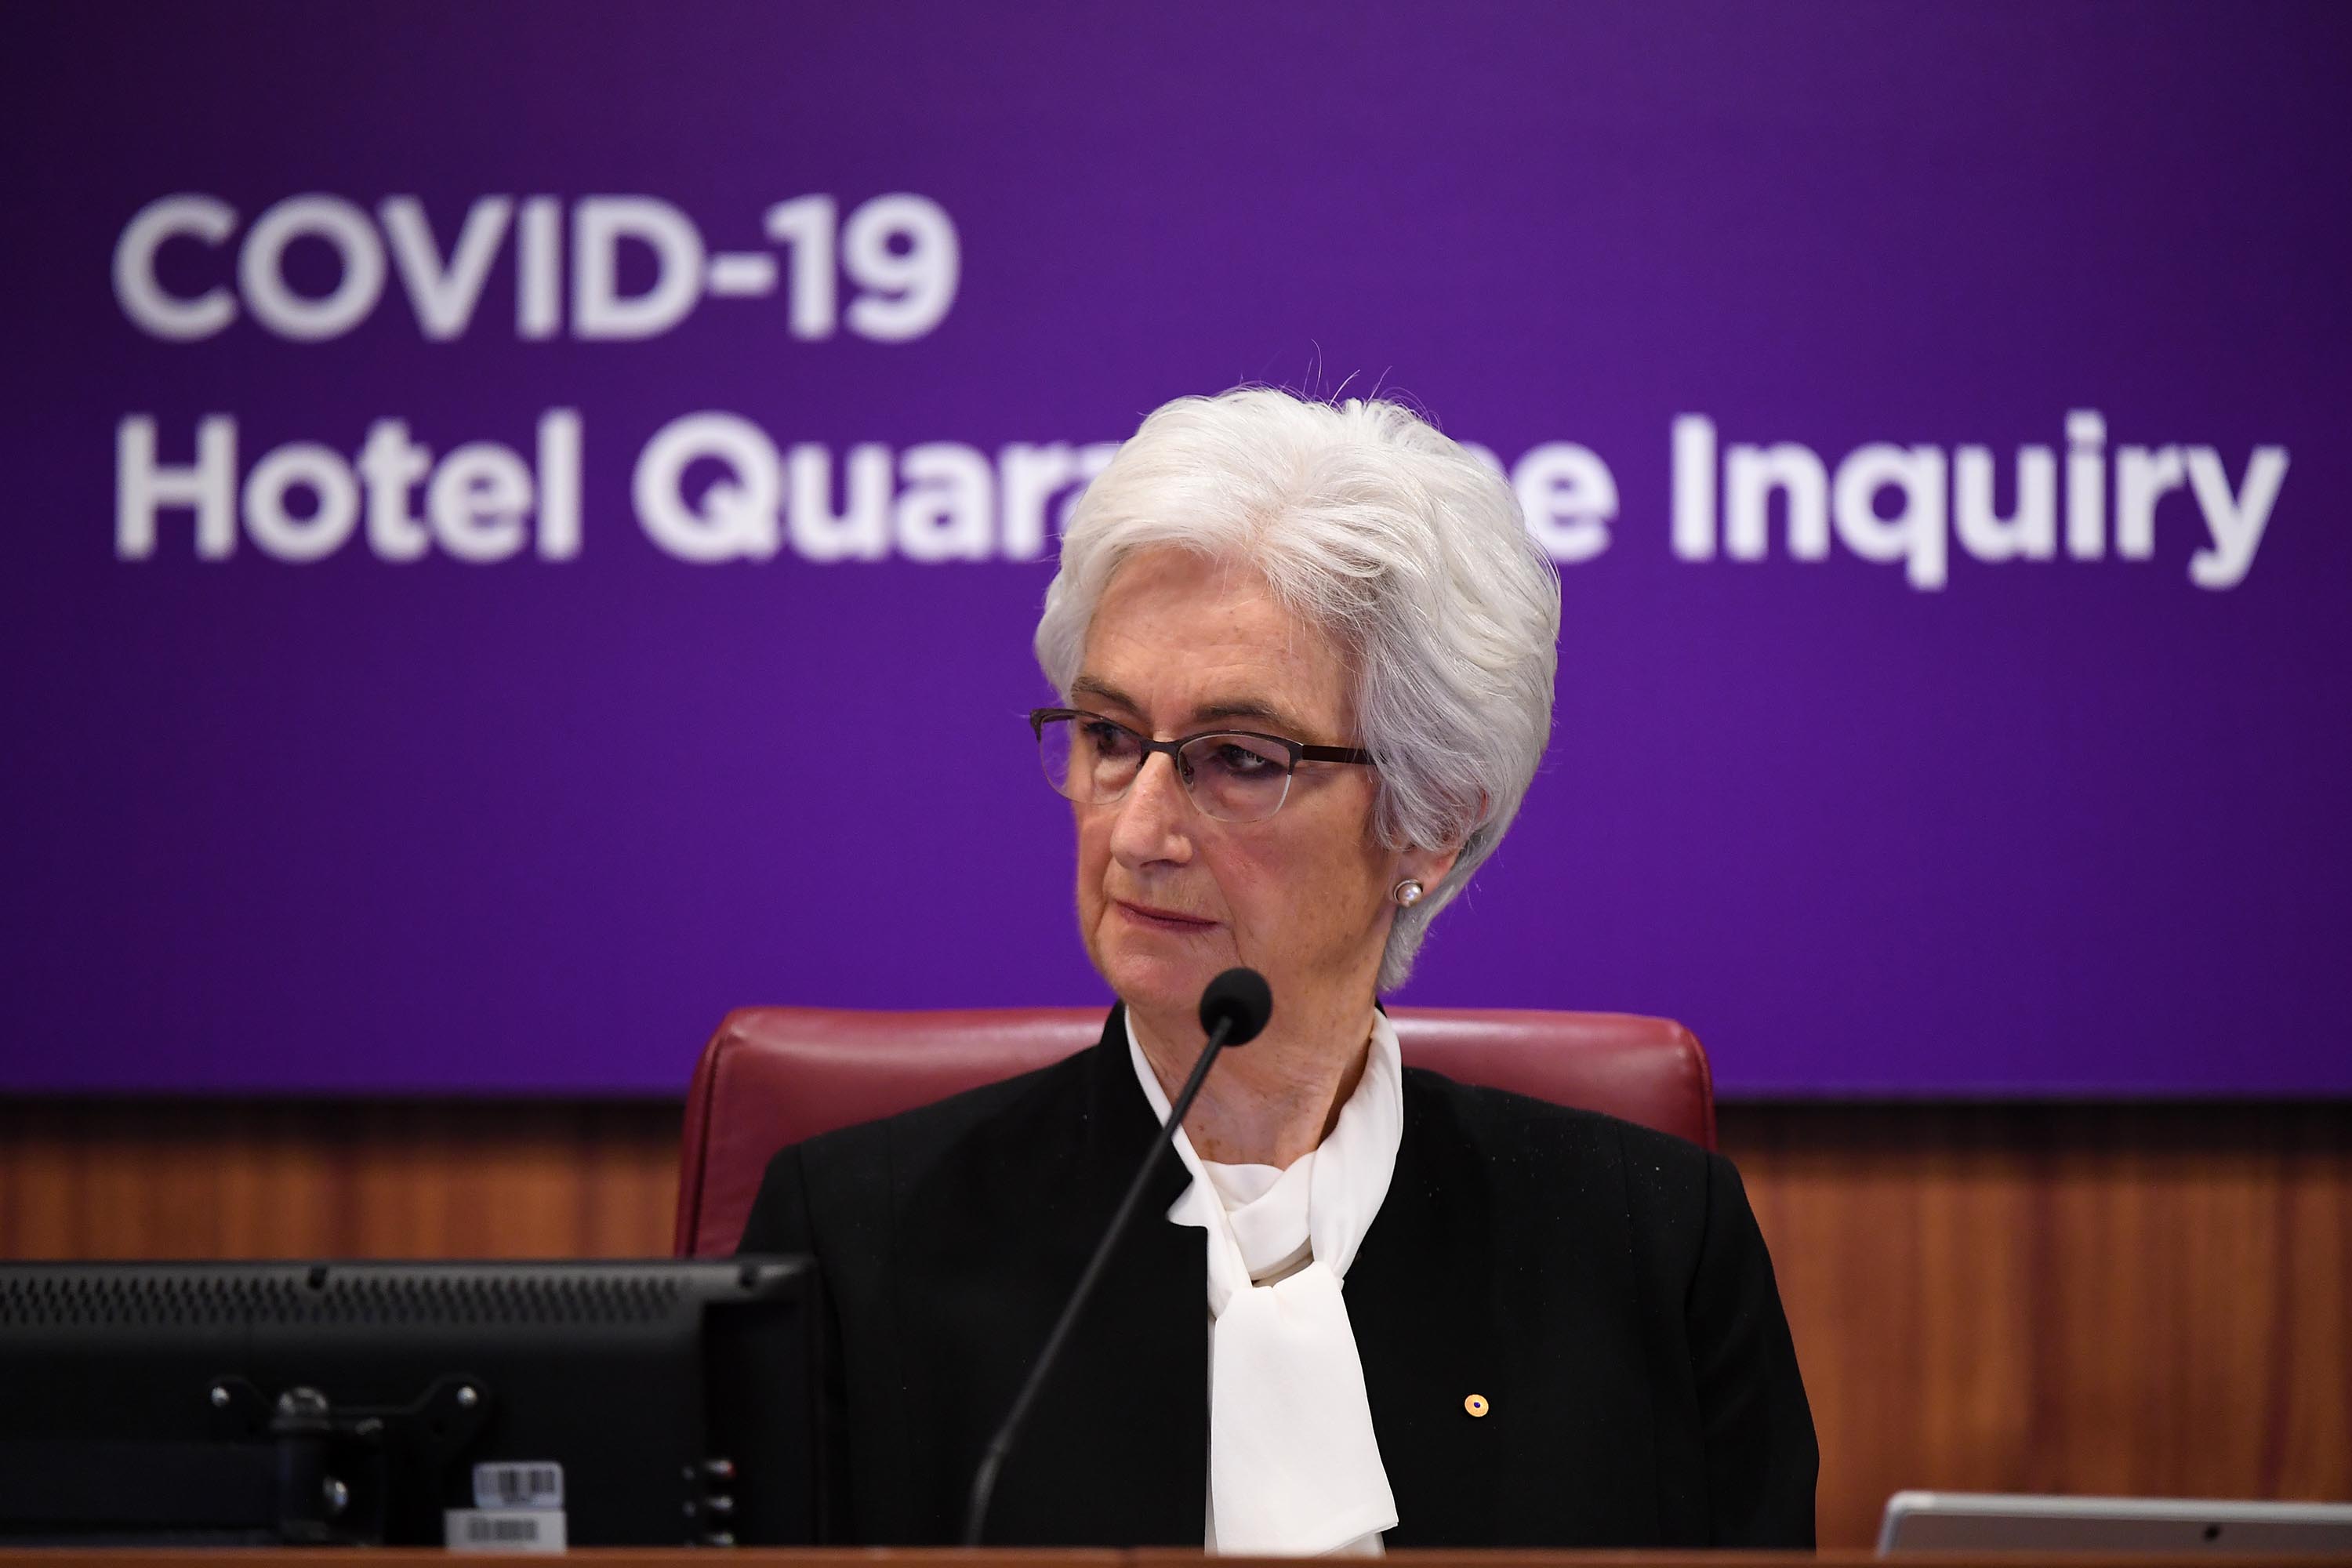 The Honourable Jennifer Coate AO speaks during opening statements for the COVID-19 Hotel Quarantine Inquiry in Melbourne, Australia, on July 20.